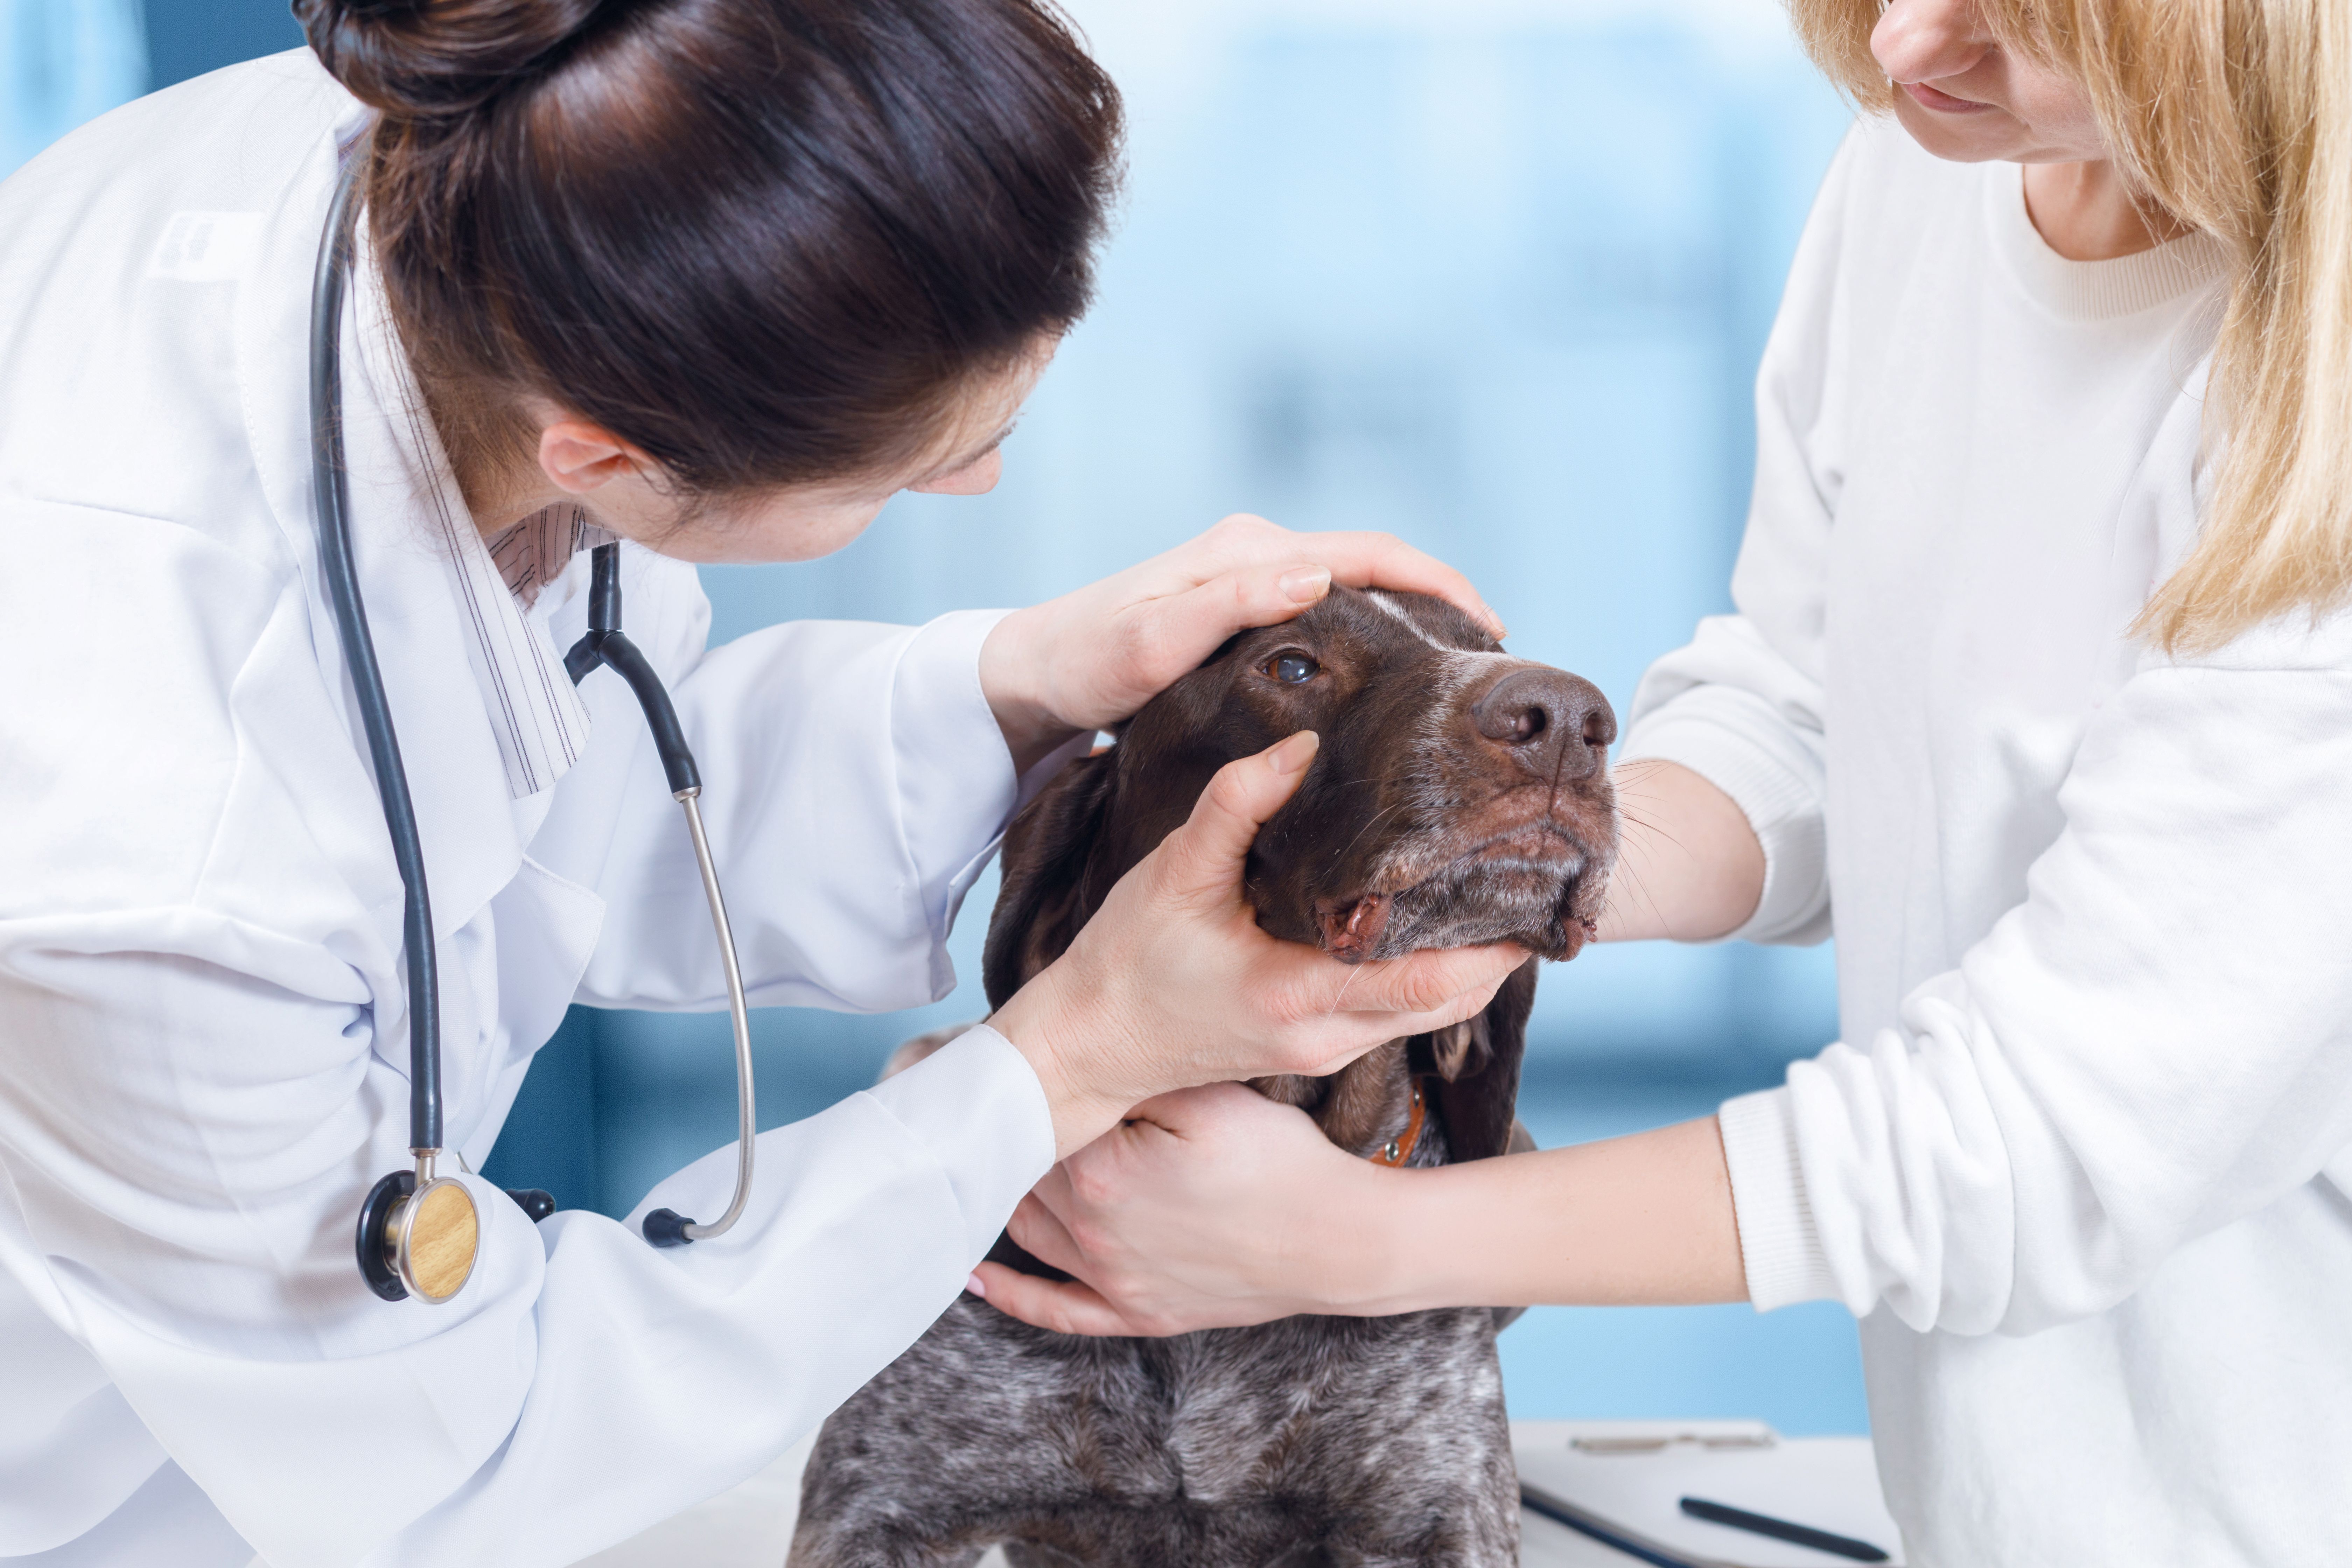 AVMA unveils new “Language of Veterinary Care” online tools and breakthrough research